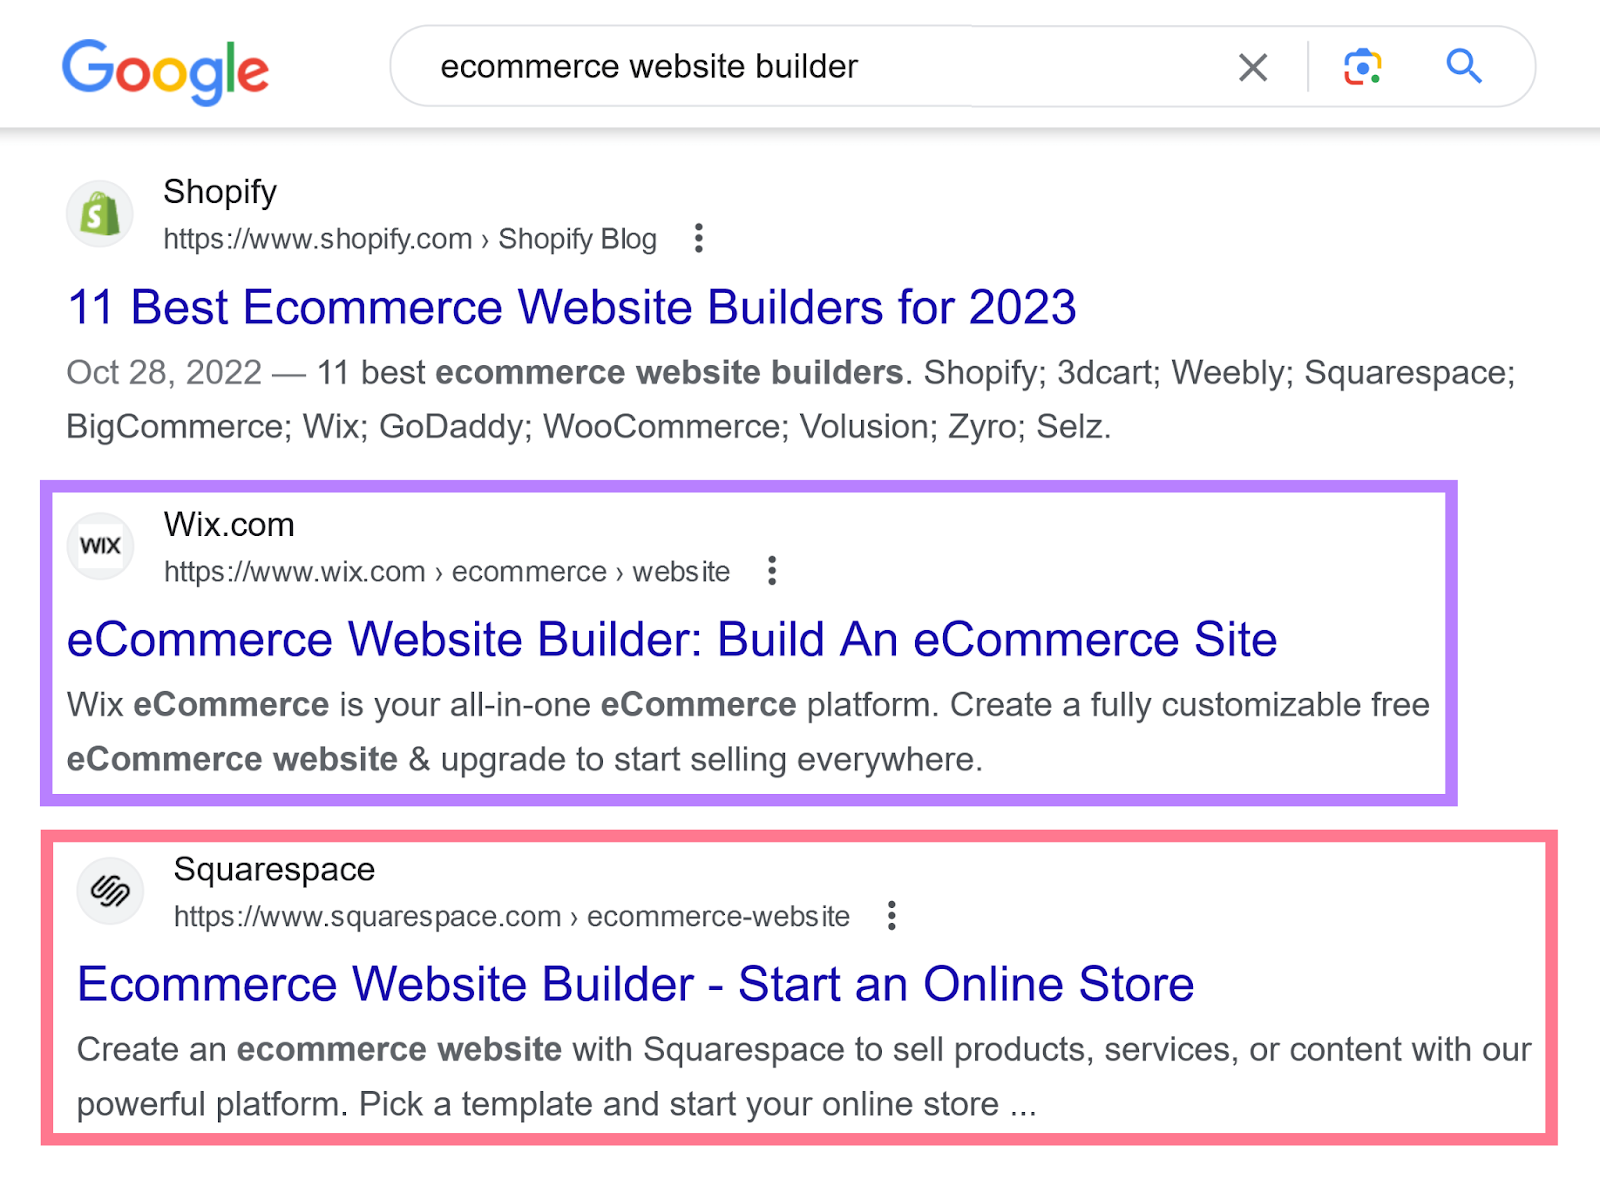 Google search for “ecommerce website builder” s،ws S،pify, Wix and Square،e in the first results